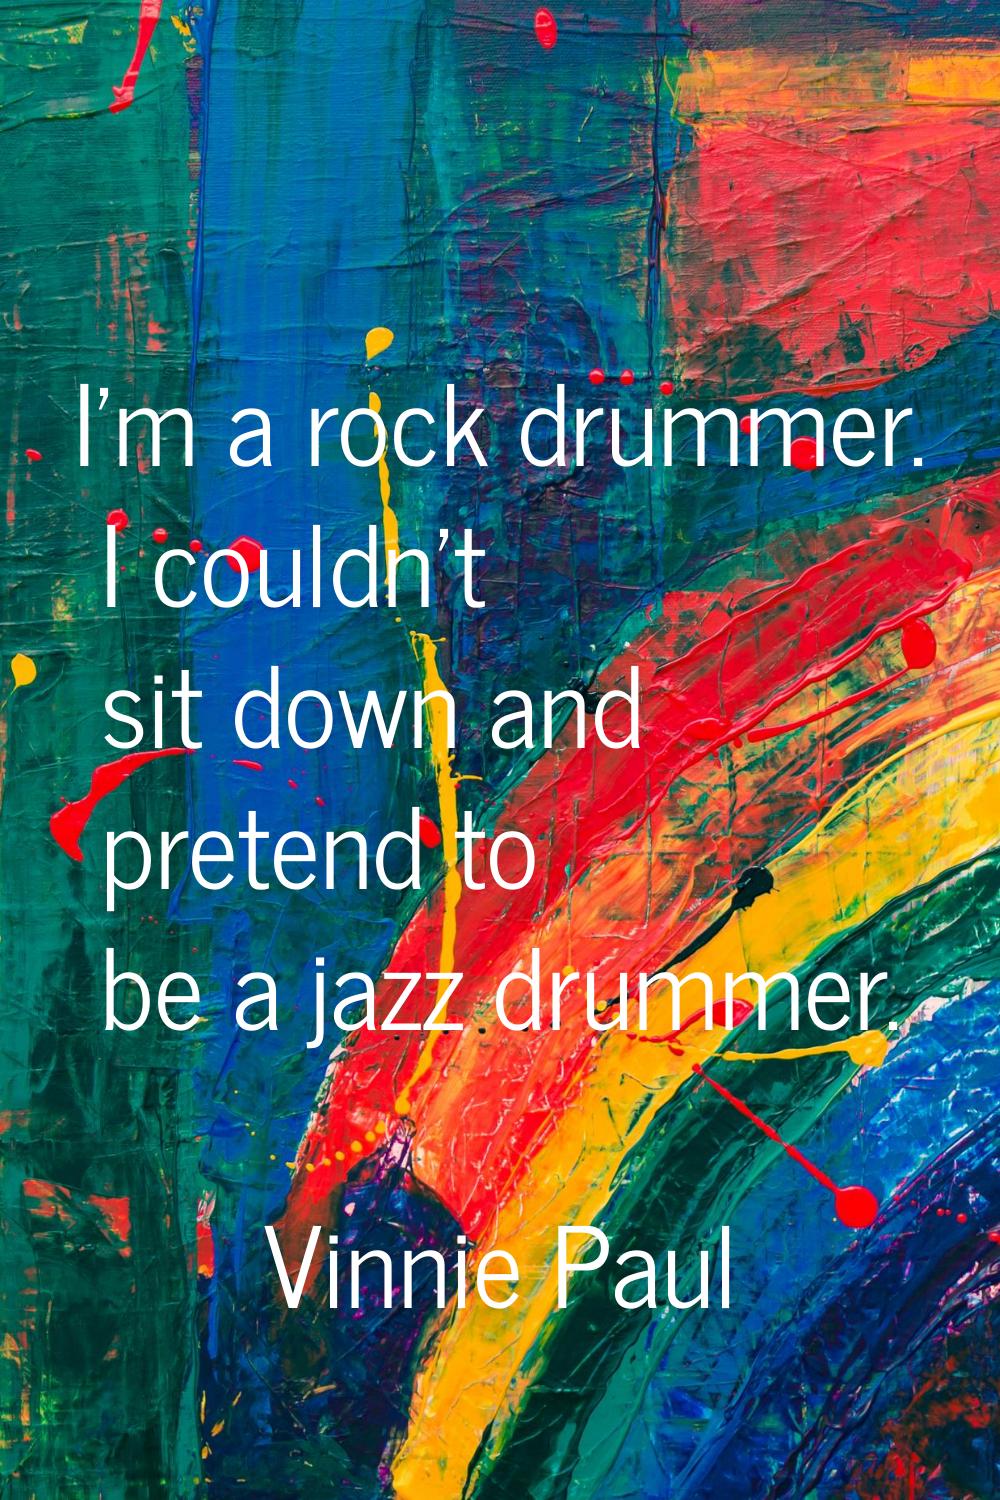 I'm a rock drummer. I couldn't sit down and pretend to be a jazz drummer.